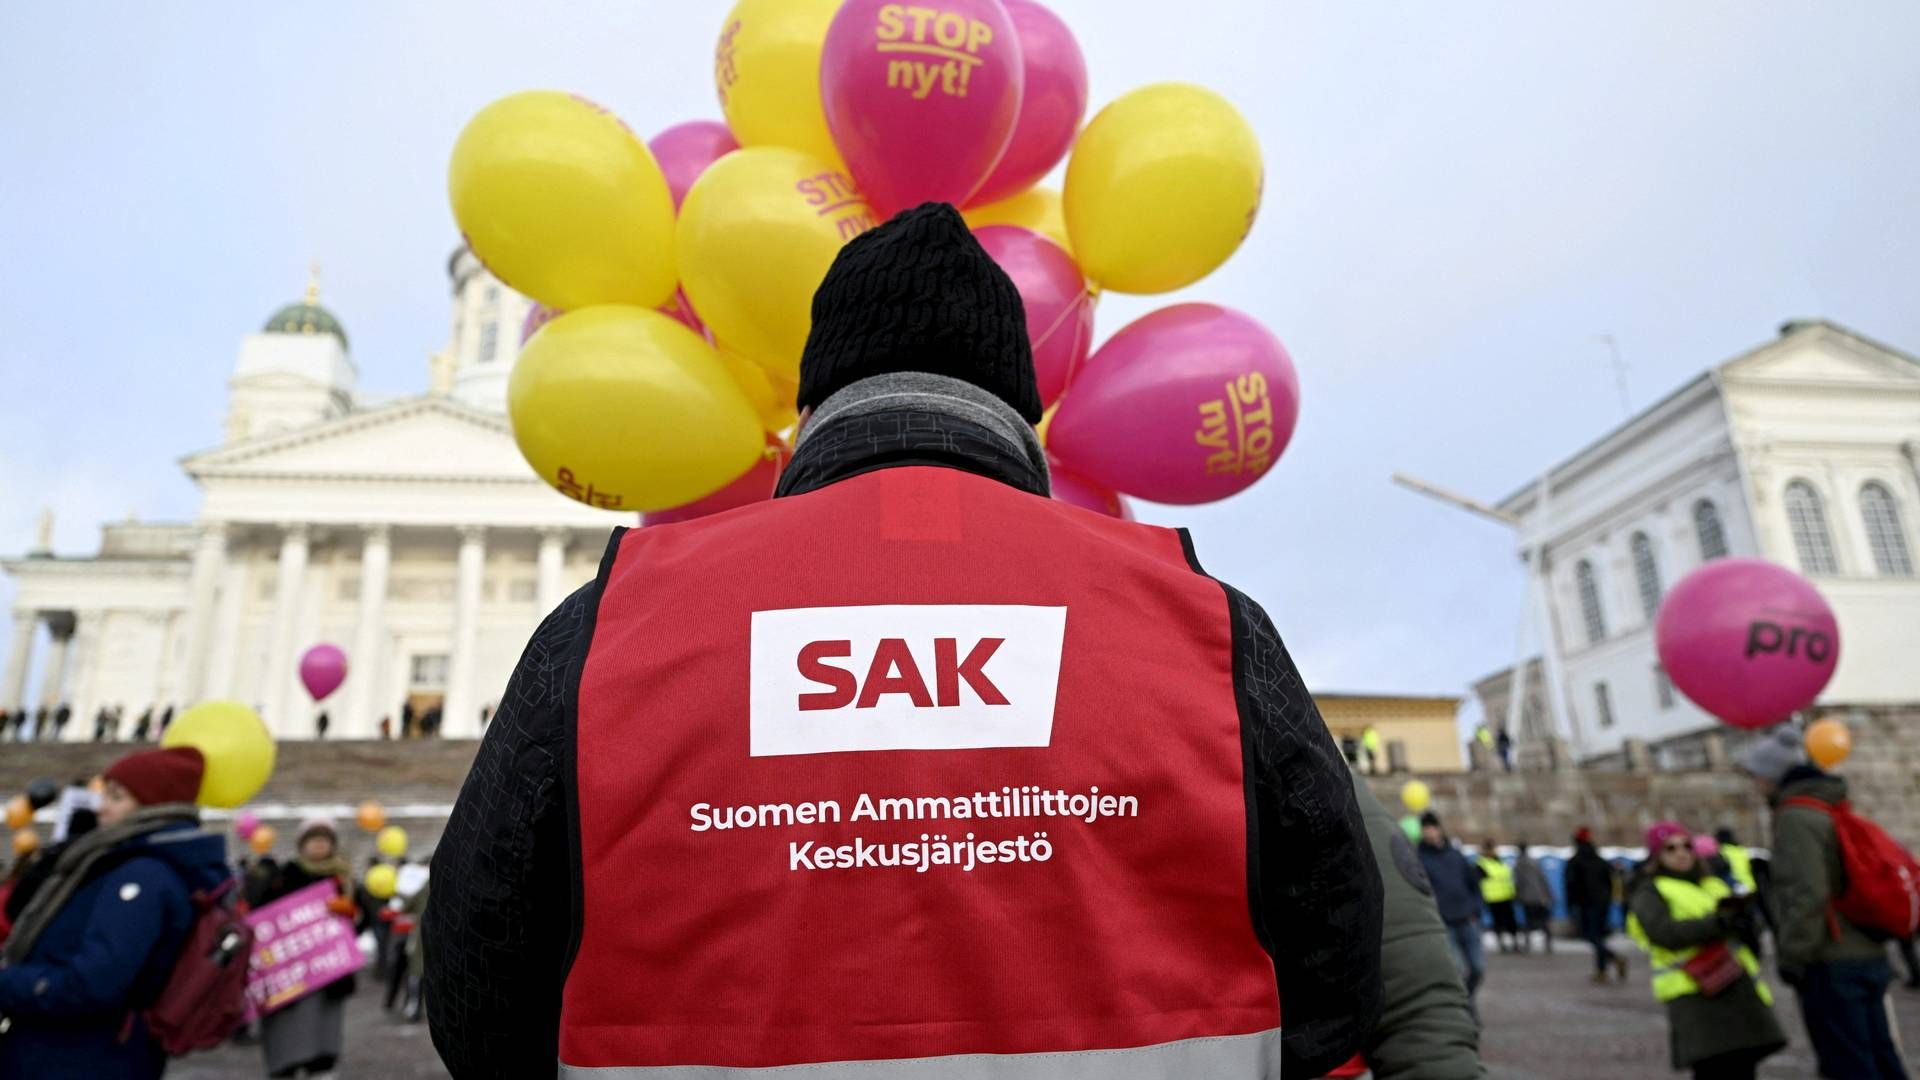 File photo. A man wearing a red vest from the Central Organisation of Finnish Trade Unions (SAK) participates in the Stop Now! demonstration against the Finnish government's labor market policy.